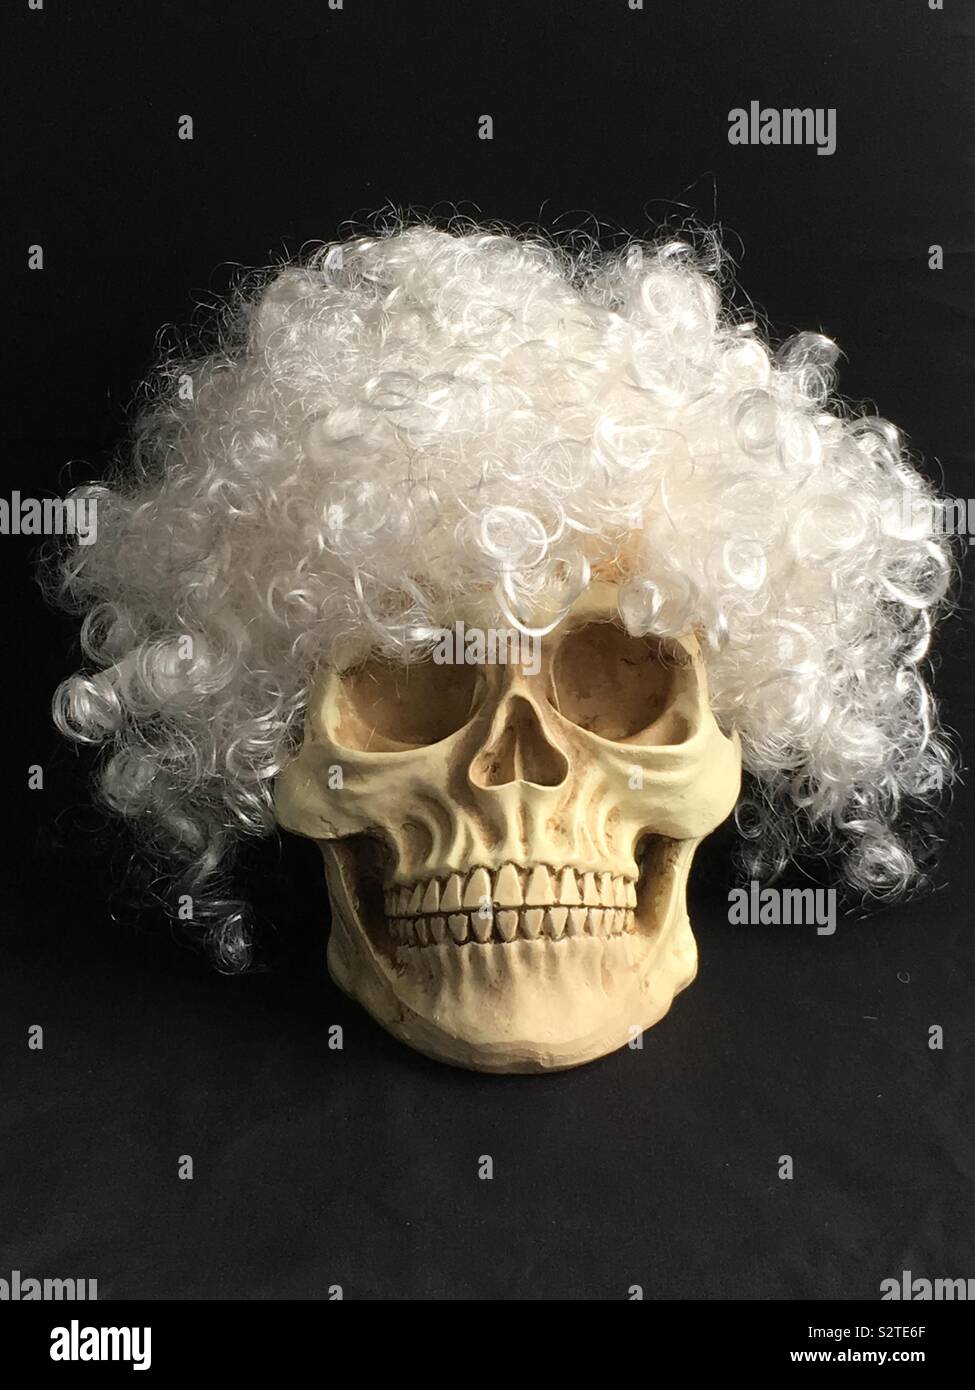 Skull wearing a white Afro wig against a black background Stock Photo